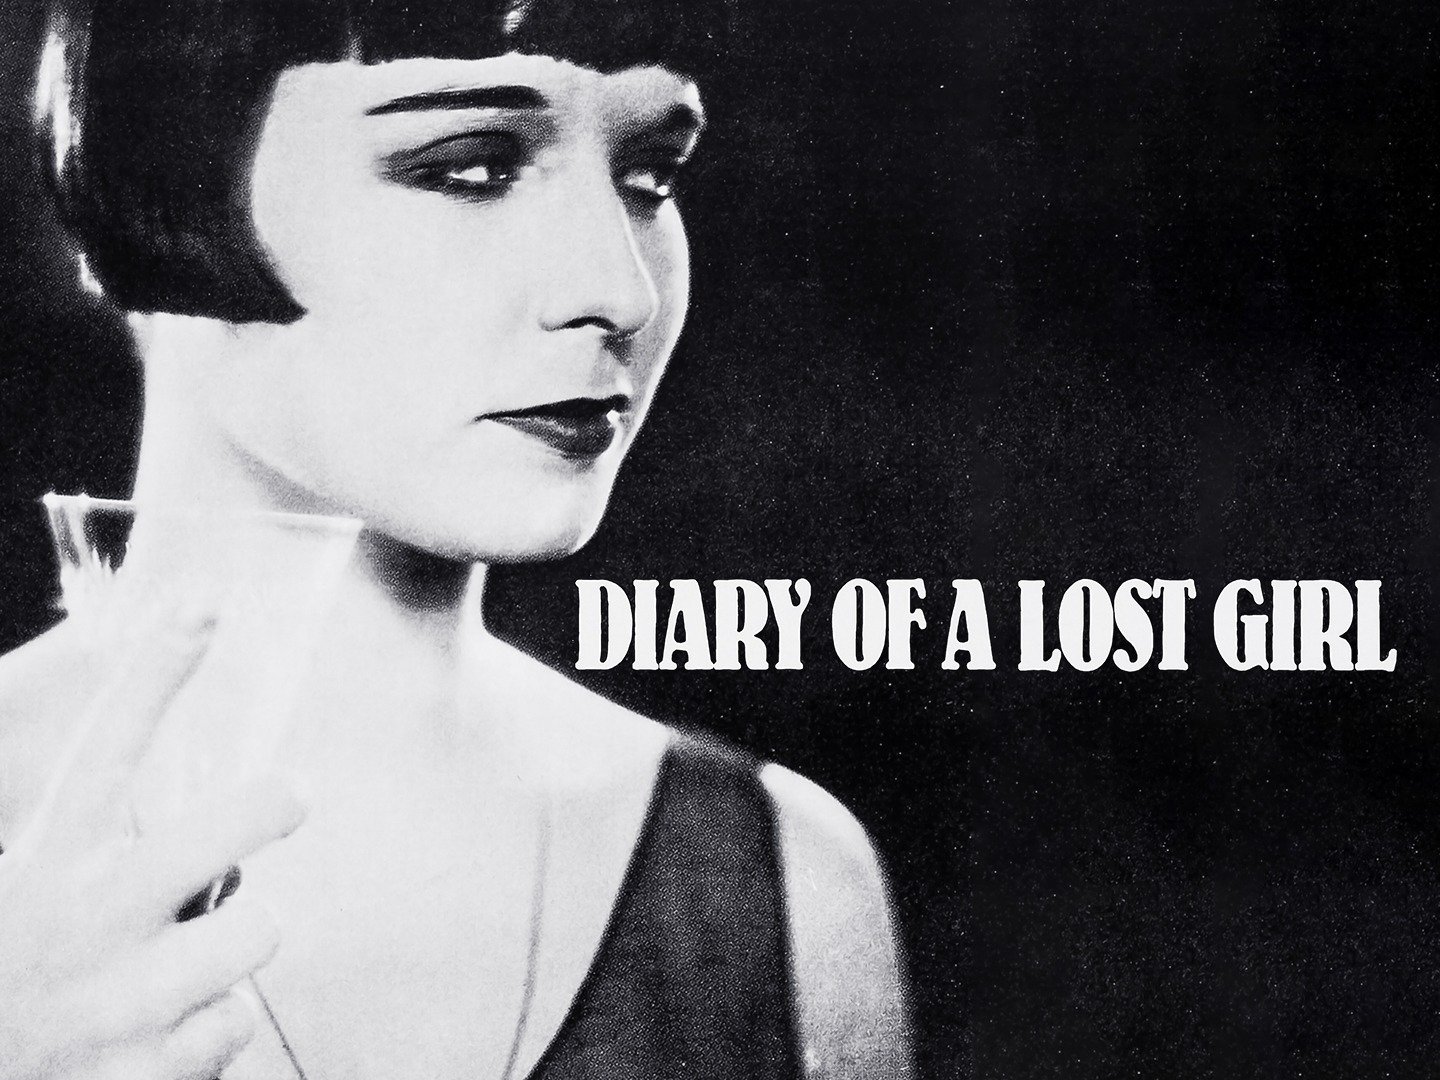 44-facts-about-the-movie-diary-of-a-lost-girl